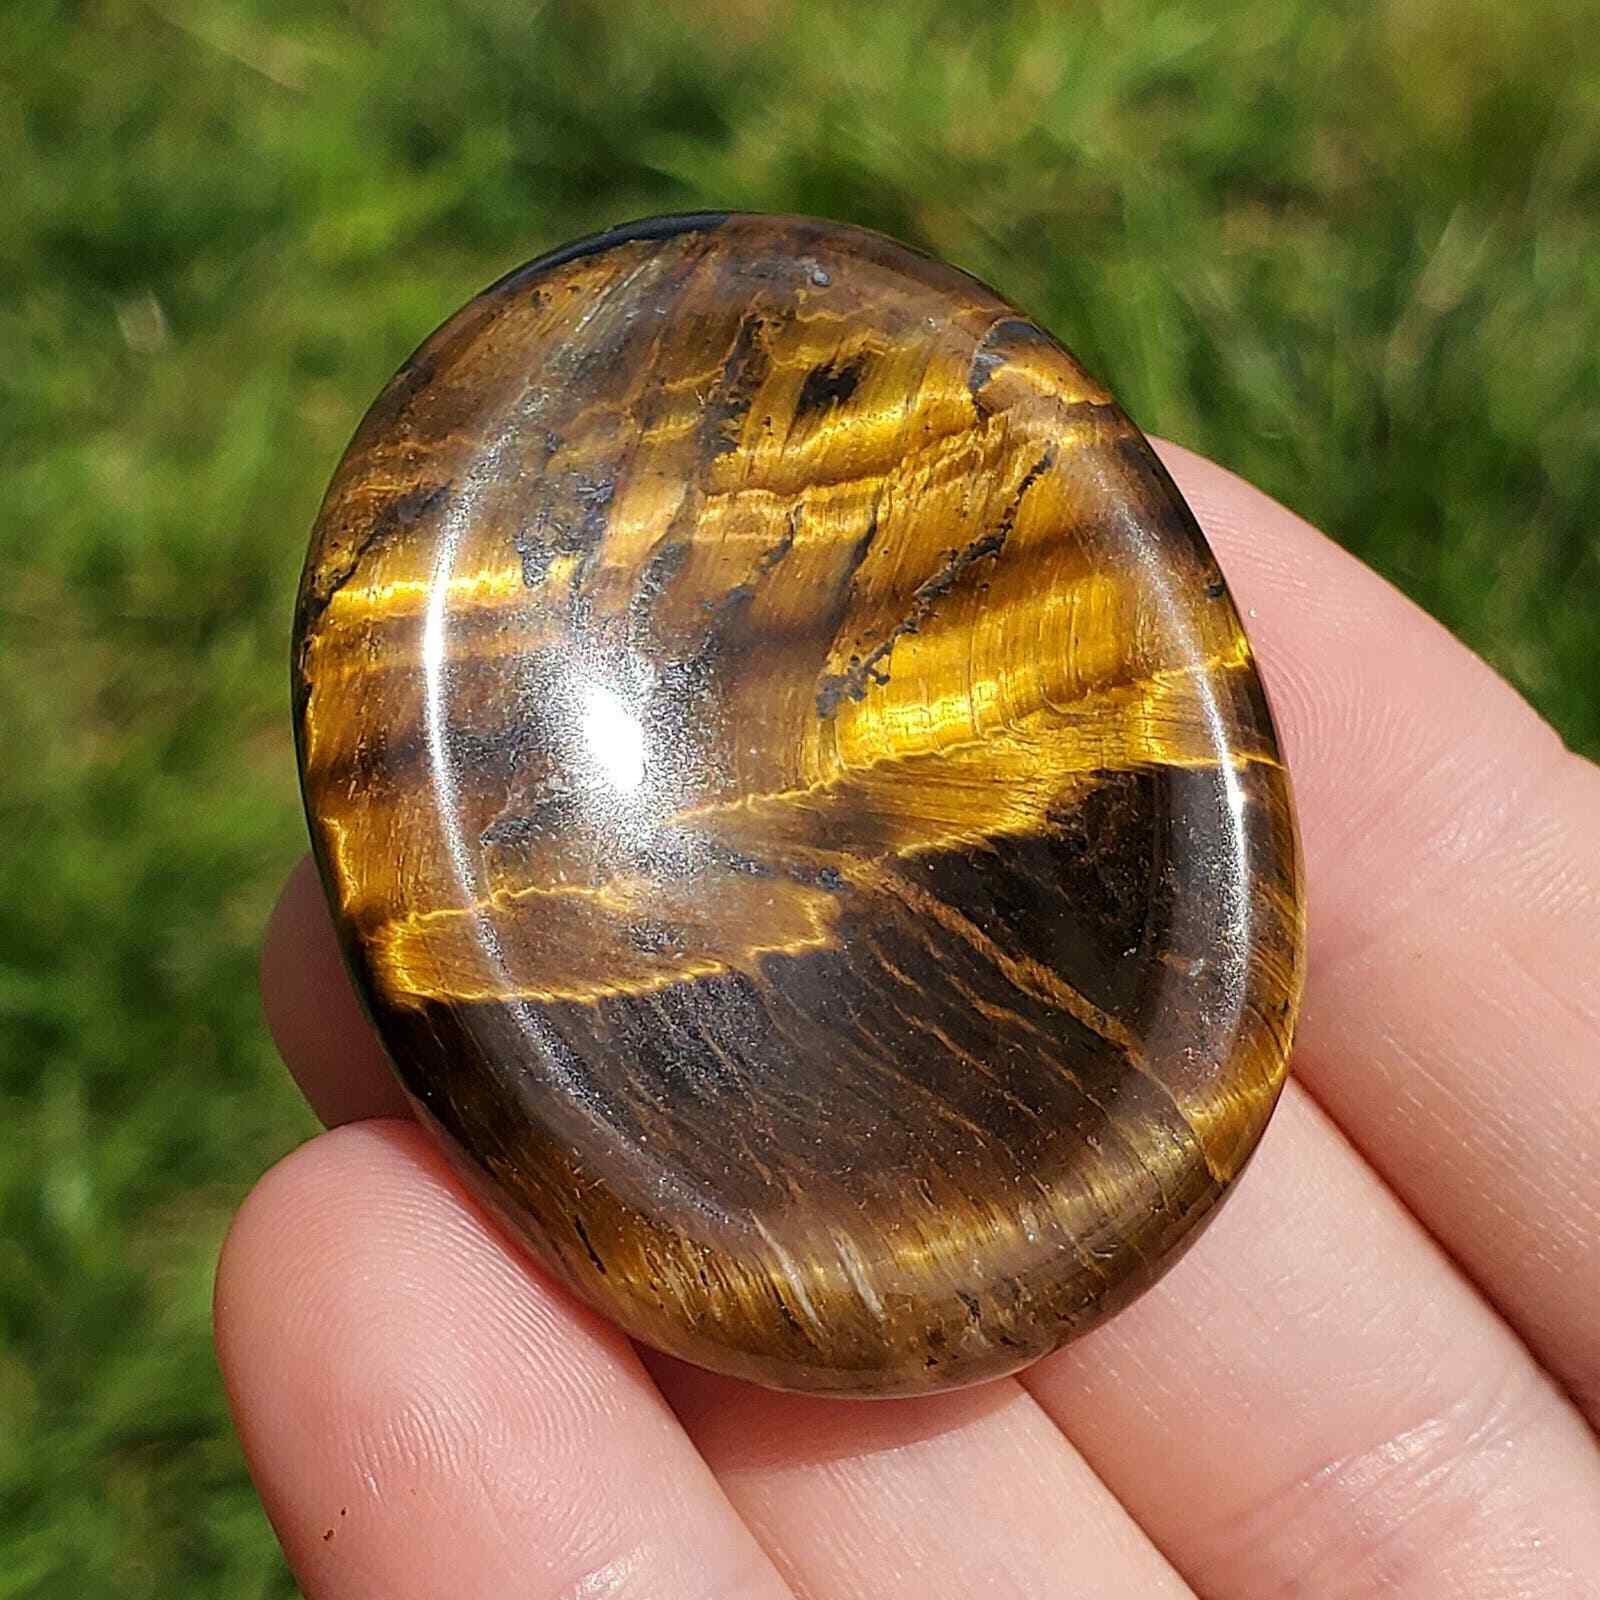 Tiger Eye Worry Stone Crystals Mineral Stones Natural BONUS INFO CARD